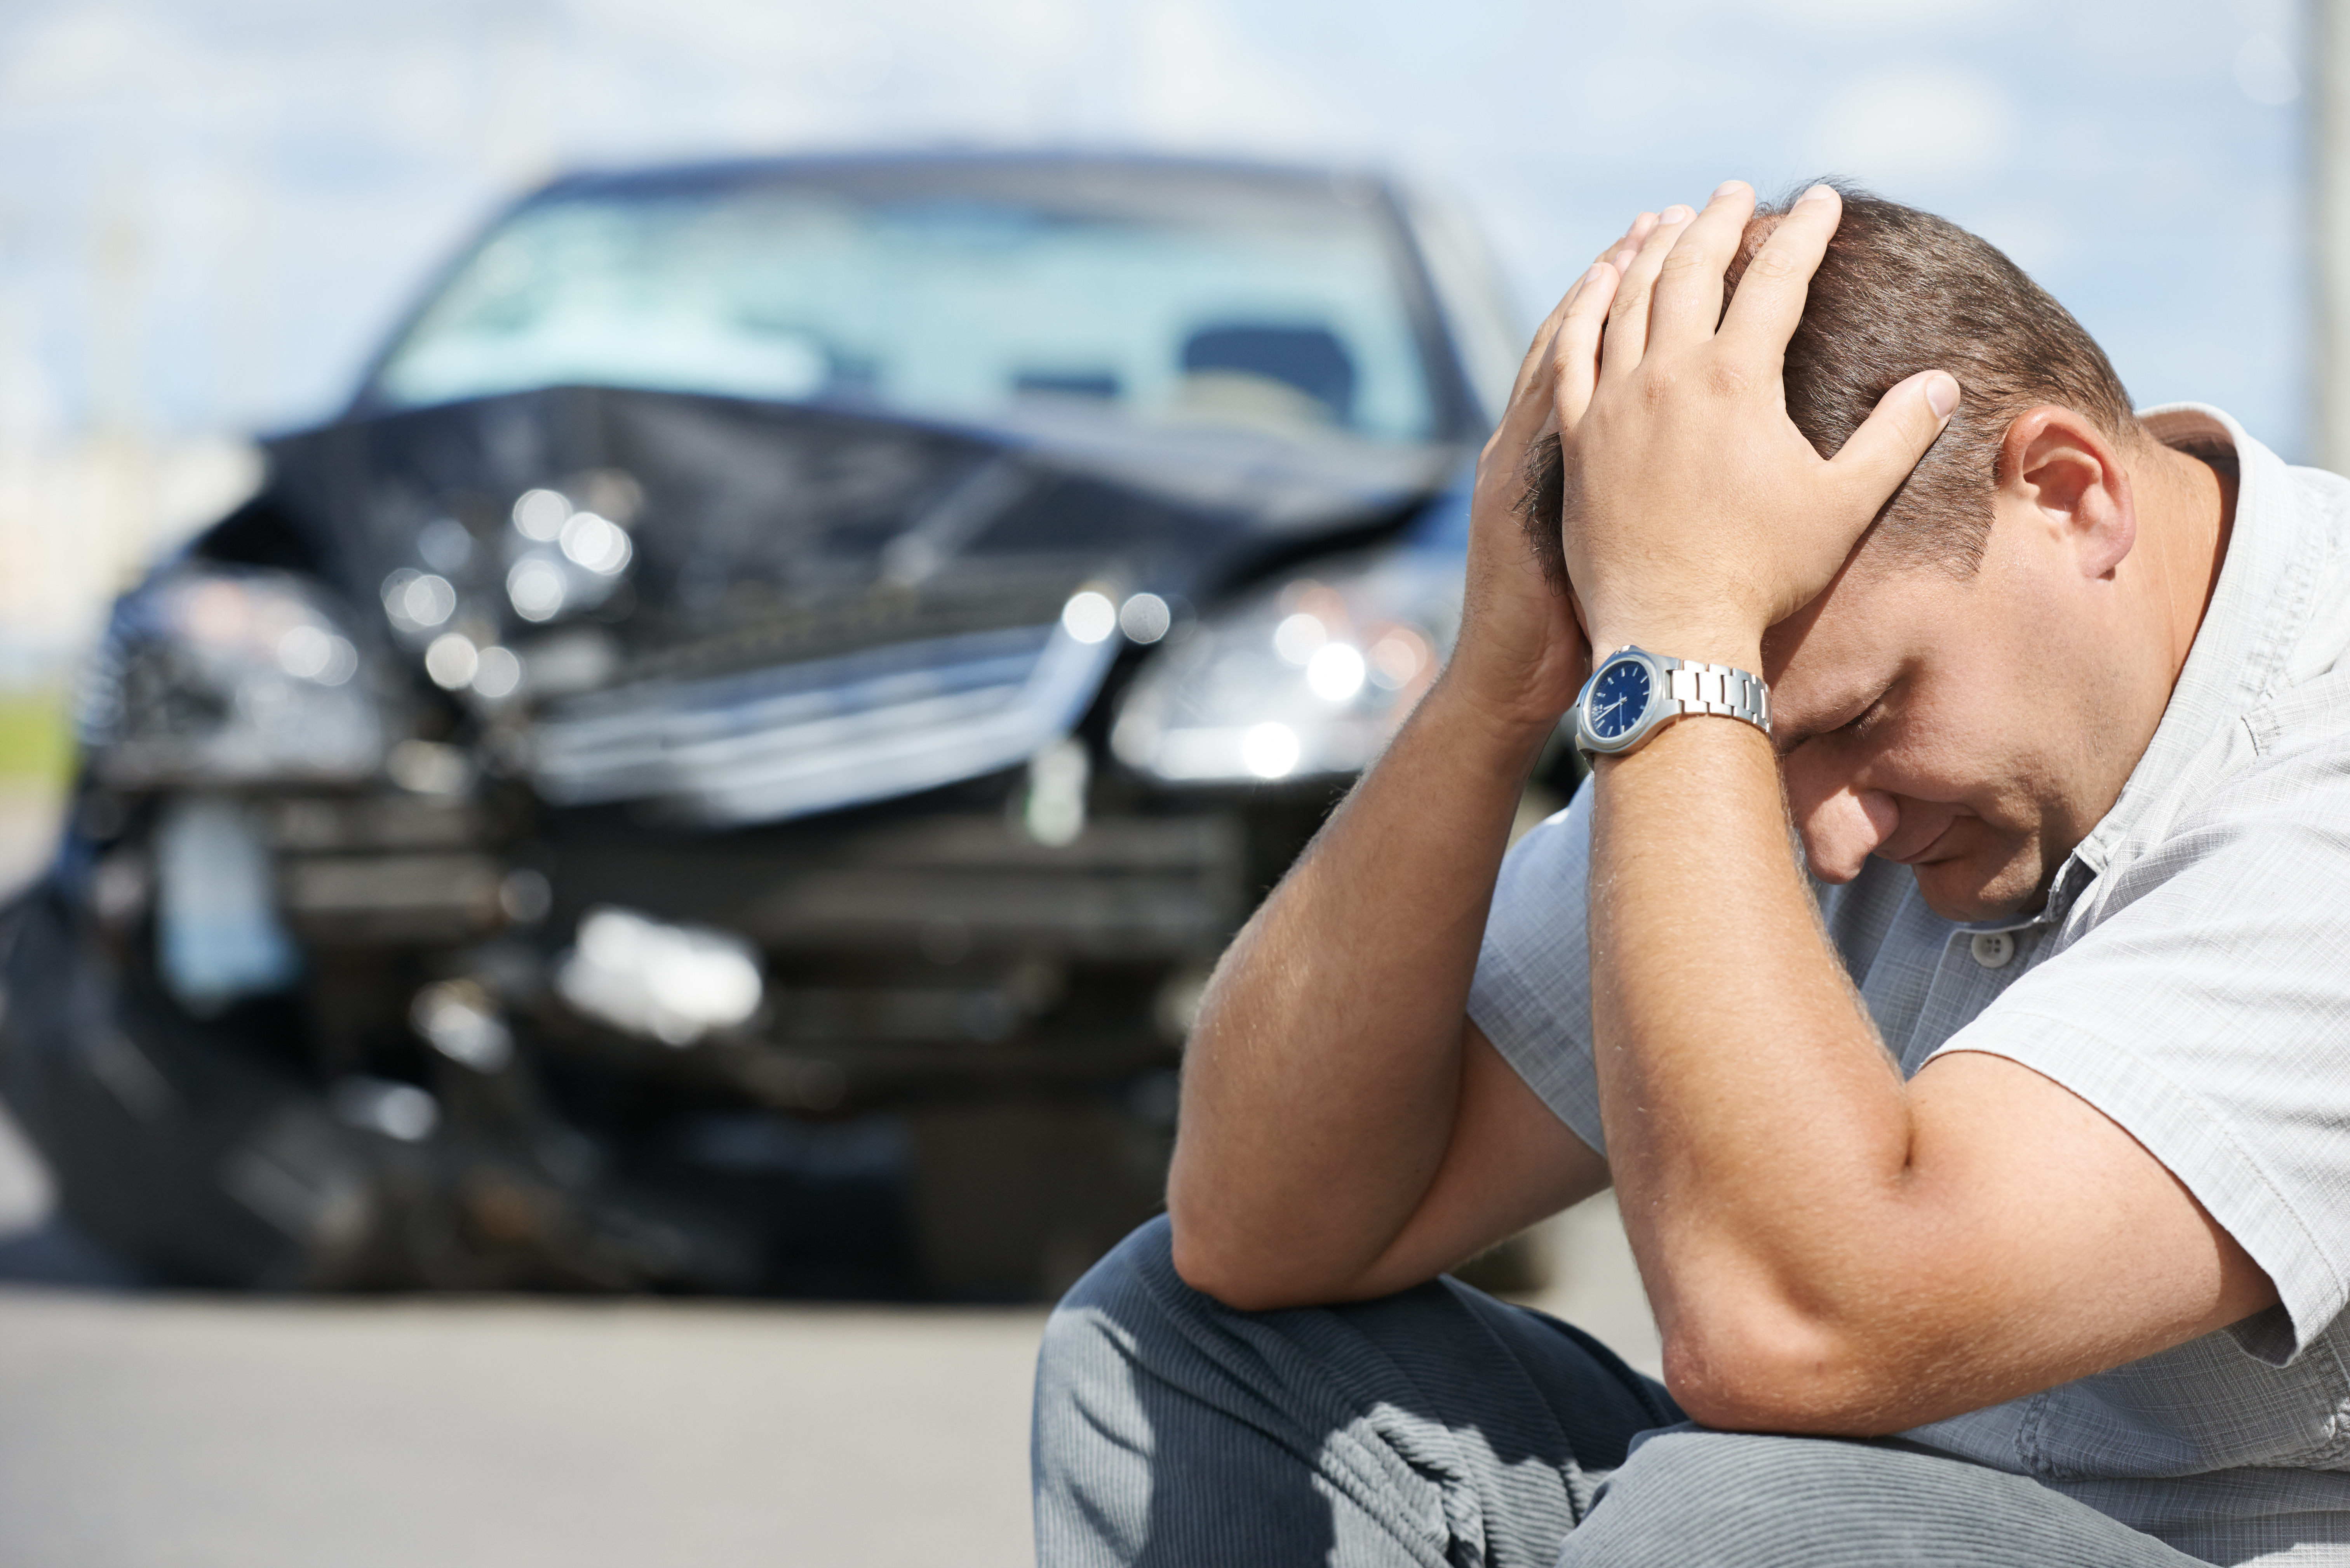 Injured In A Findlay Car Accident But Not Sure What To Do?